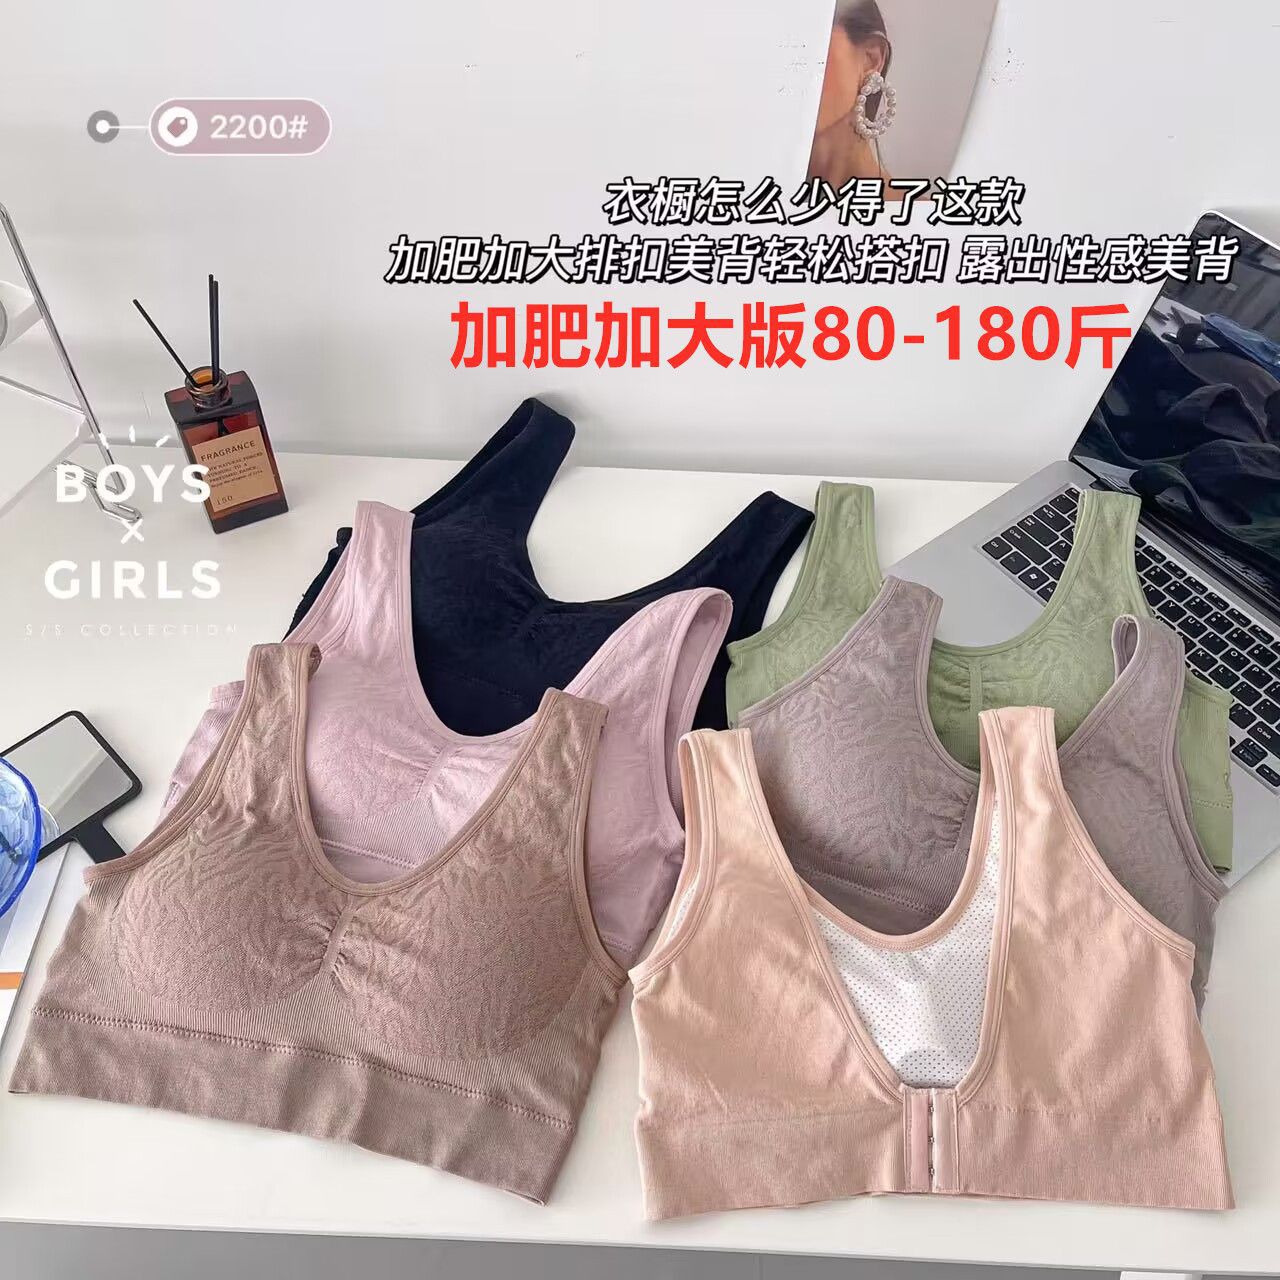 foreign trade middle-aged mom beauty back underwear women hook and eye closure plus-sized plus size tube top without steel ring vest sports bra